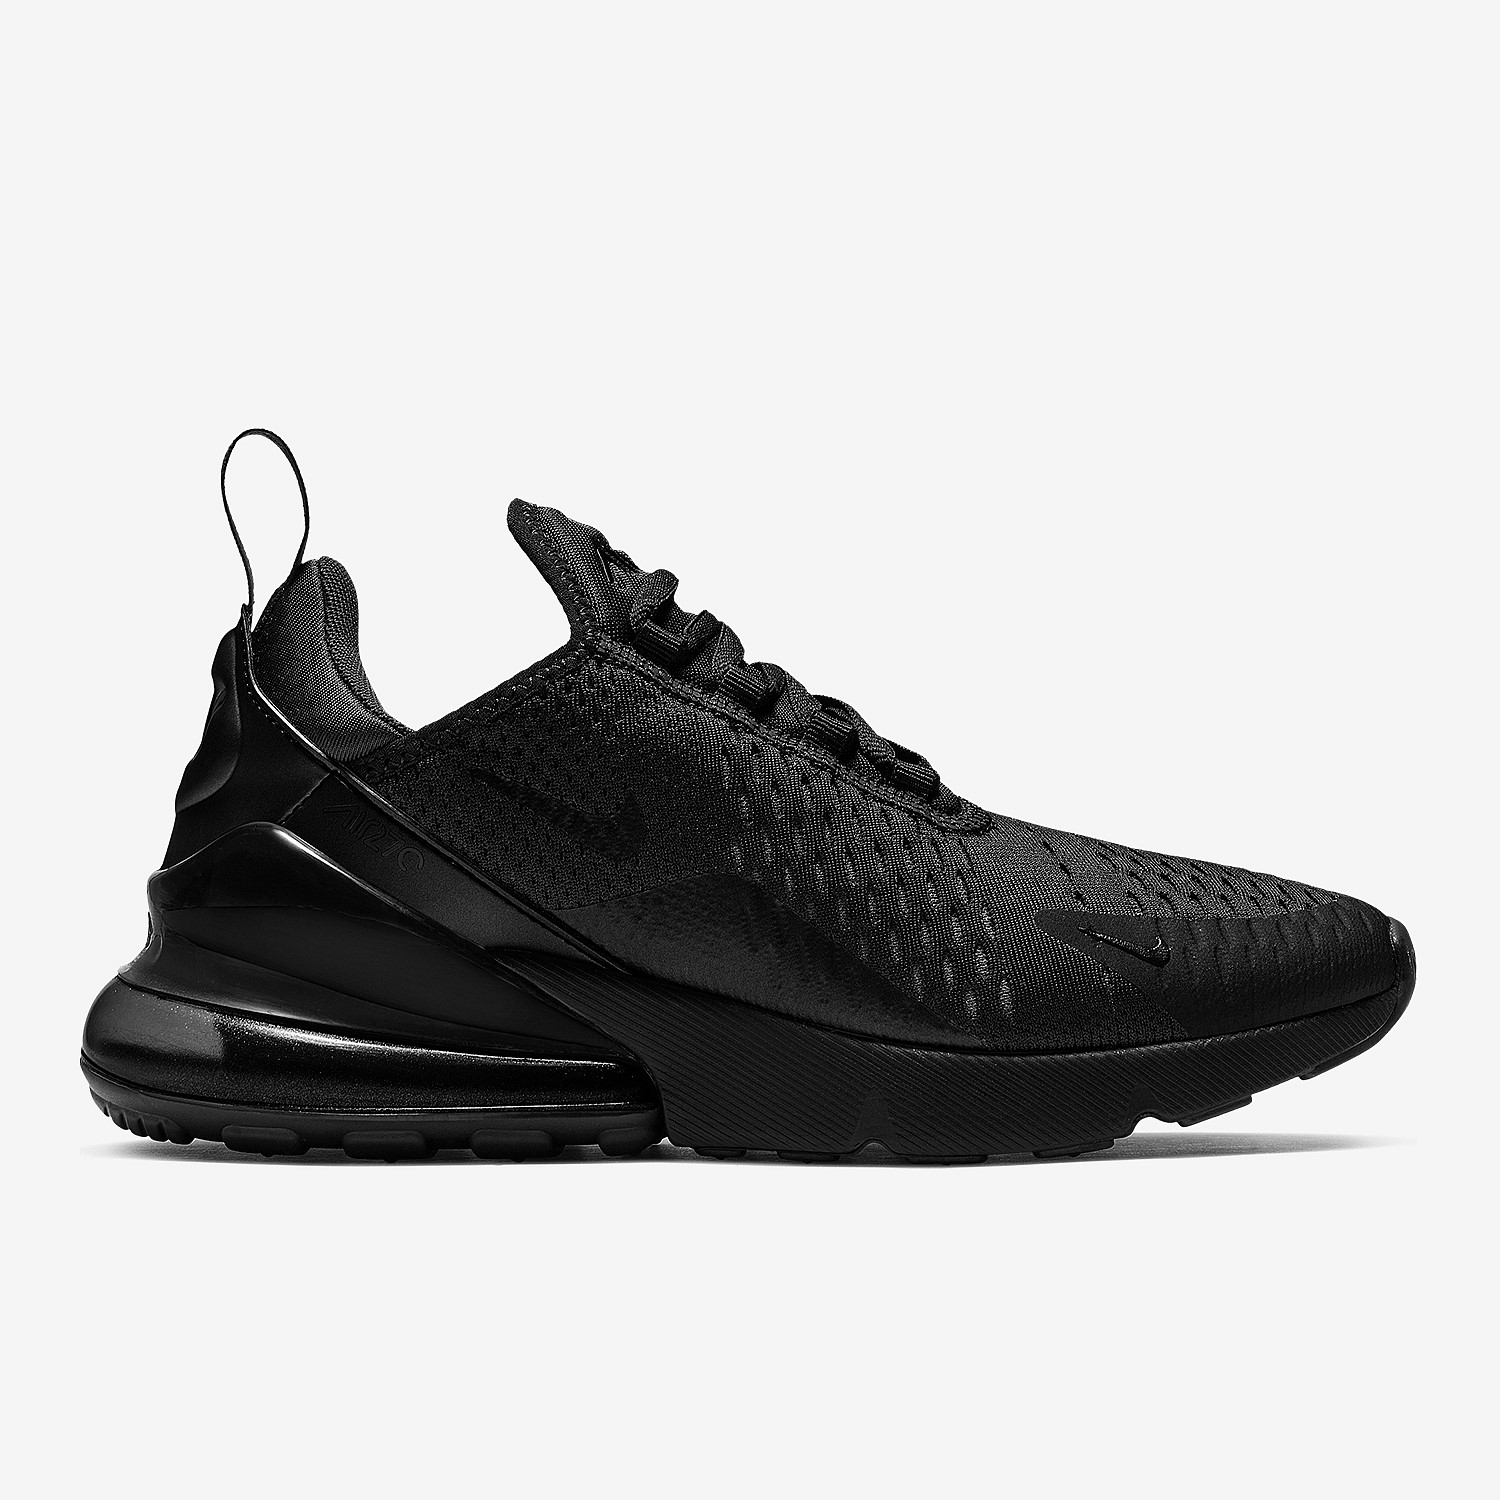 Nike Air Max Sneakers Online | Stirling Sports - Air Max 270 Womens